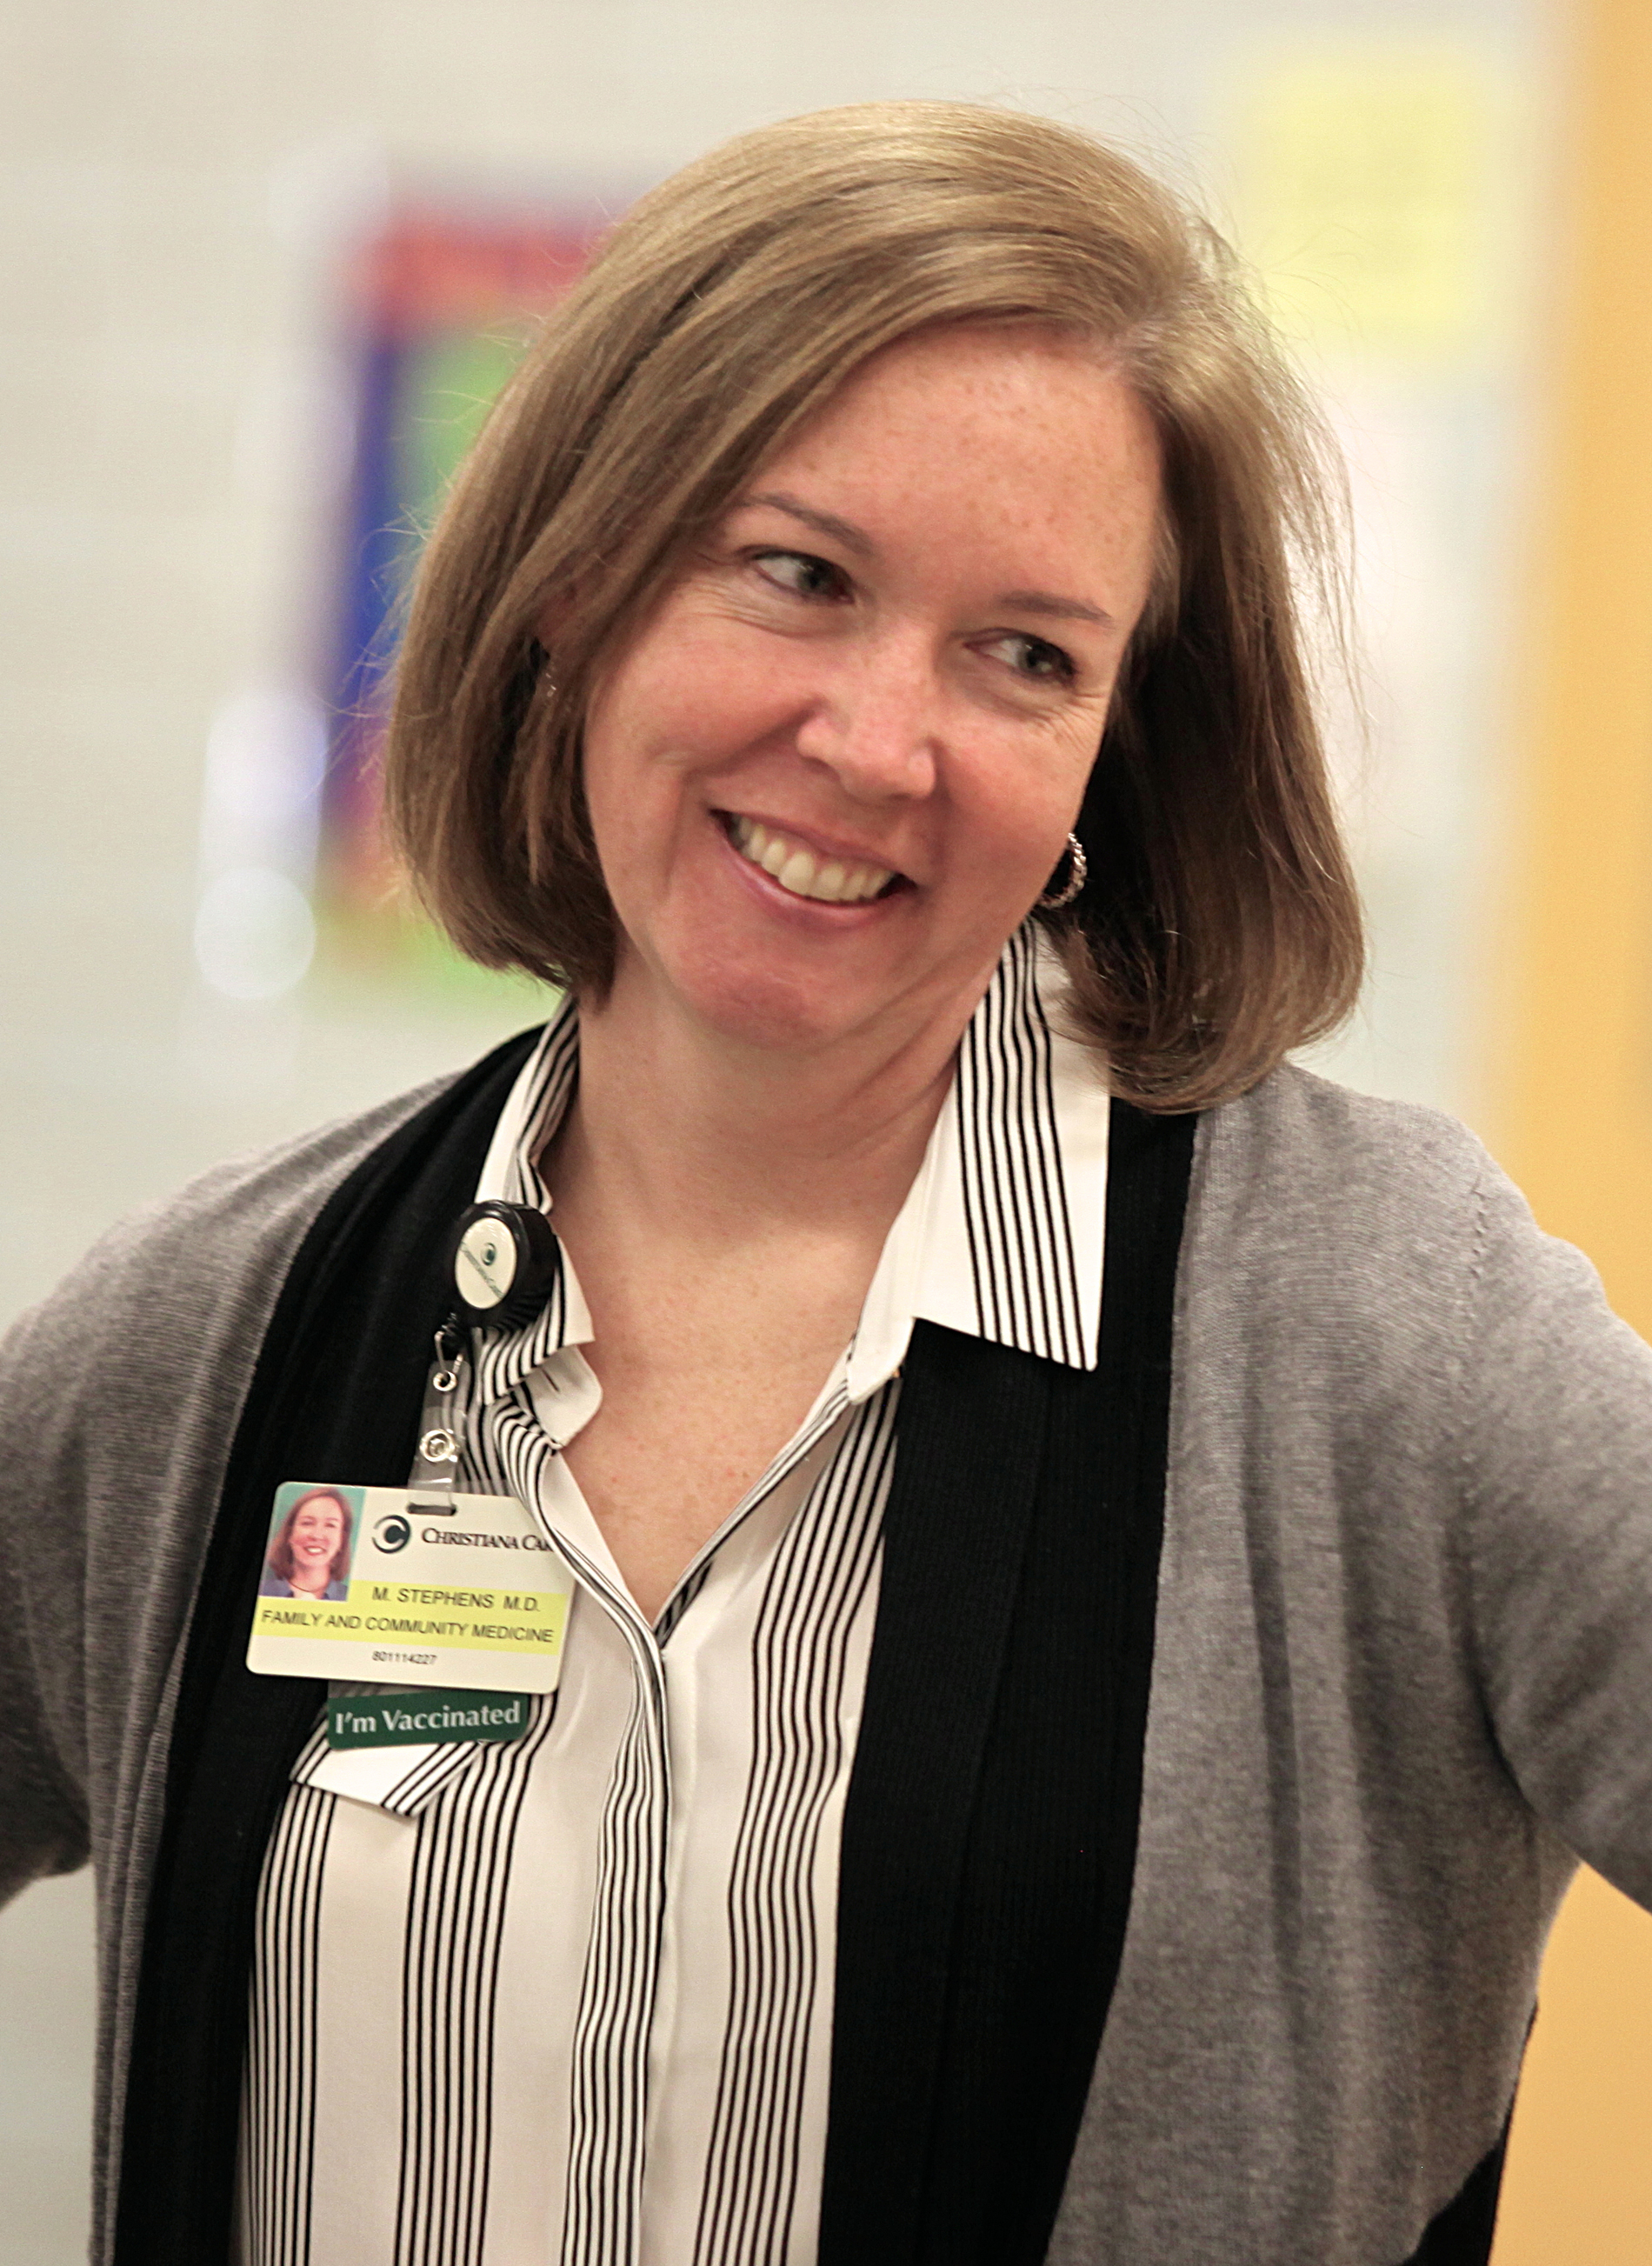 Mary Stephens, M.D., MPH, Medical Director of Christiana Care's school-based health centers